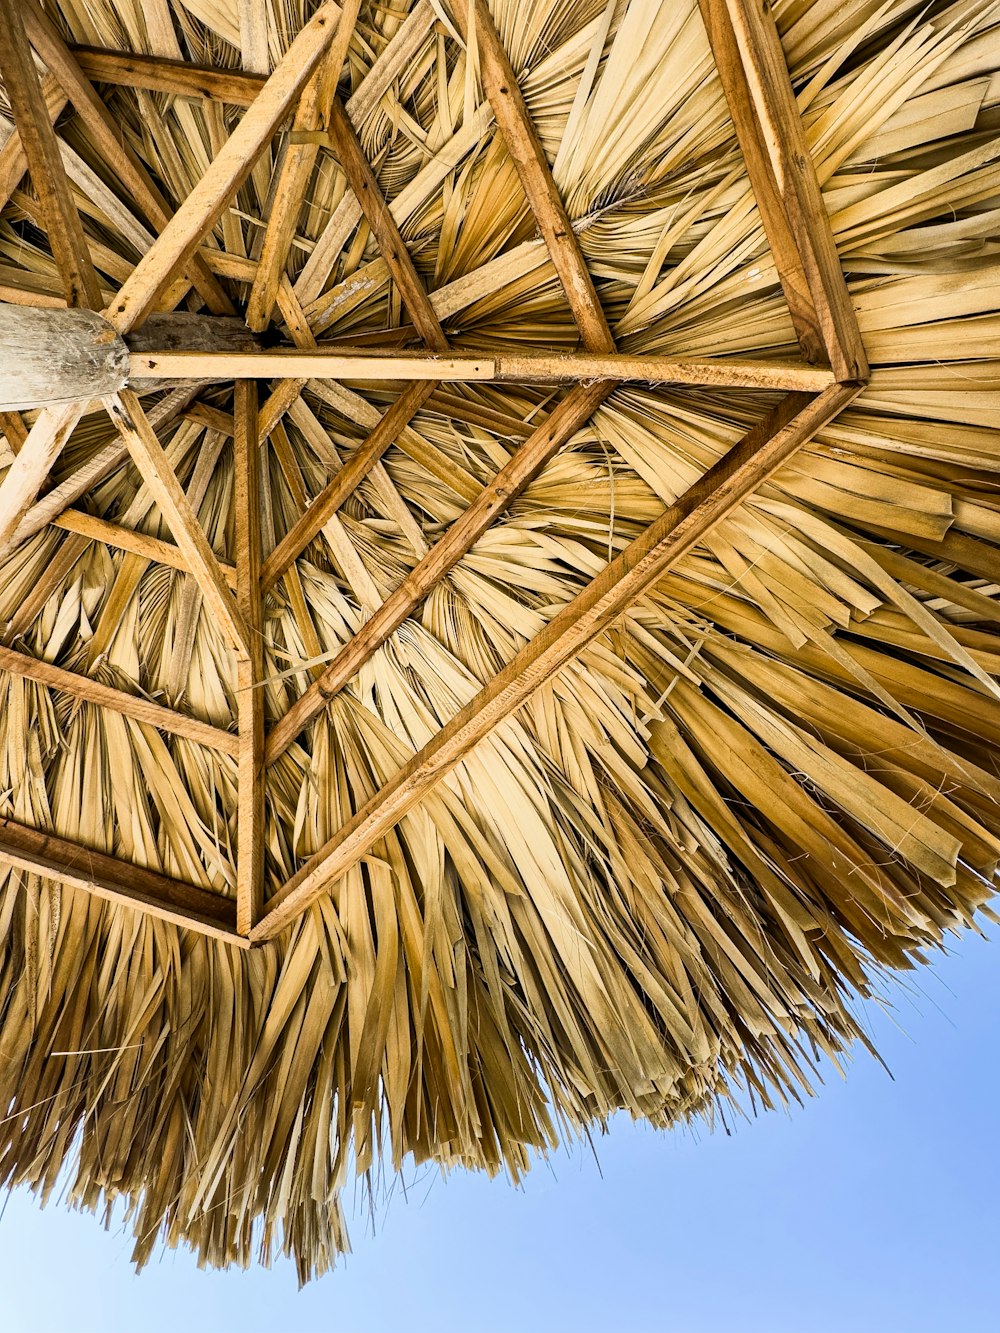 a straw umbrella with a blue sky in the background